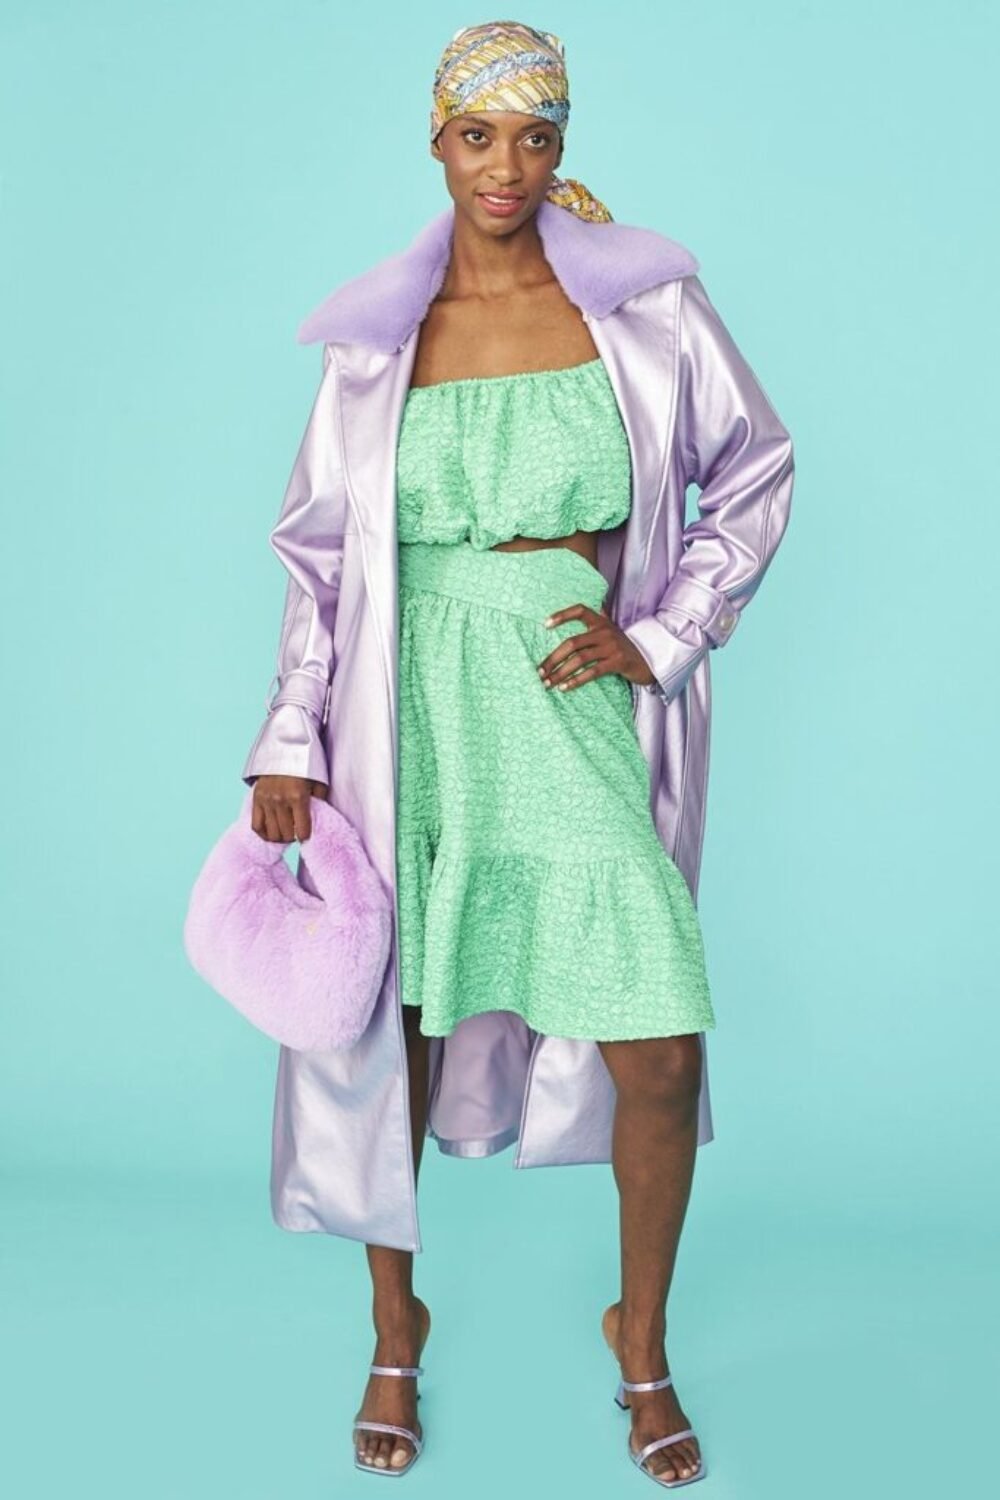 Shop Lux Lilac Faux Suede Metallic Maxi Trench Coat and women's luxury and designer clothes at www.lux-apparel.co.uk